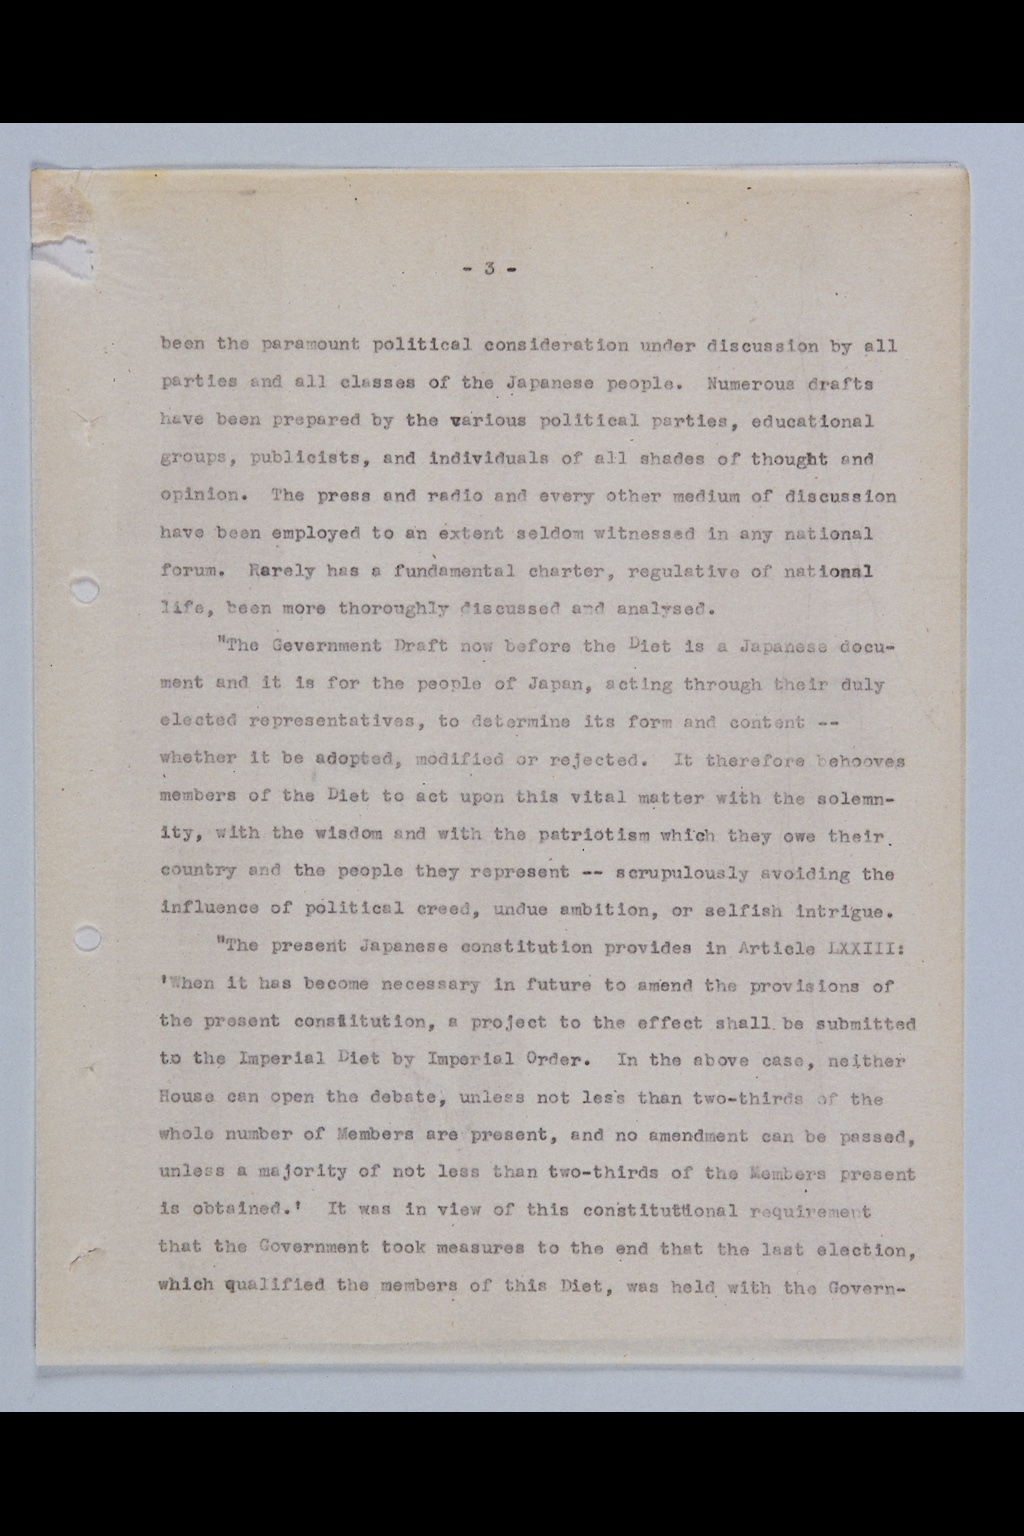 [Press Release: General MacArthur Issues Statement on Submission of Draft Constitution to Japanese Diet](Larger image)